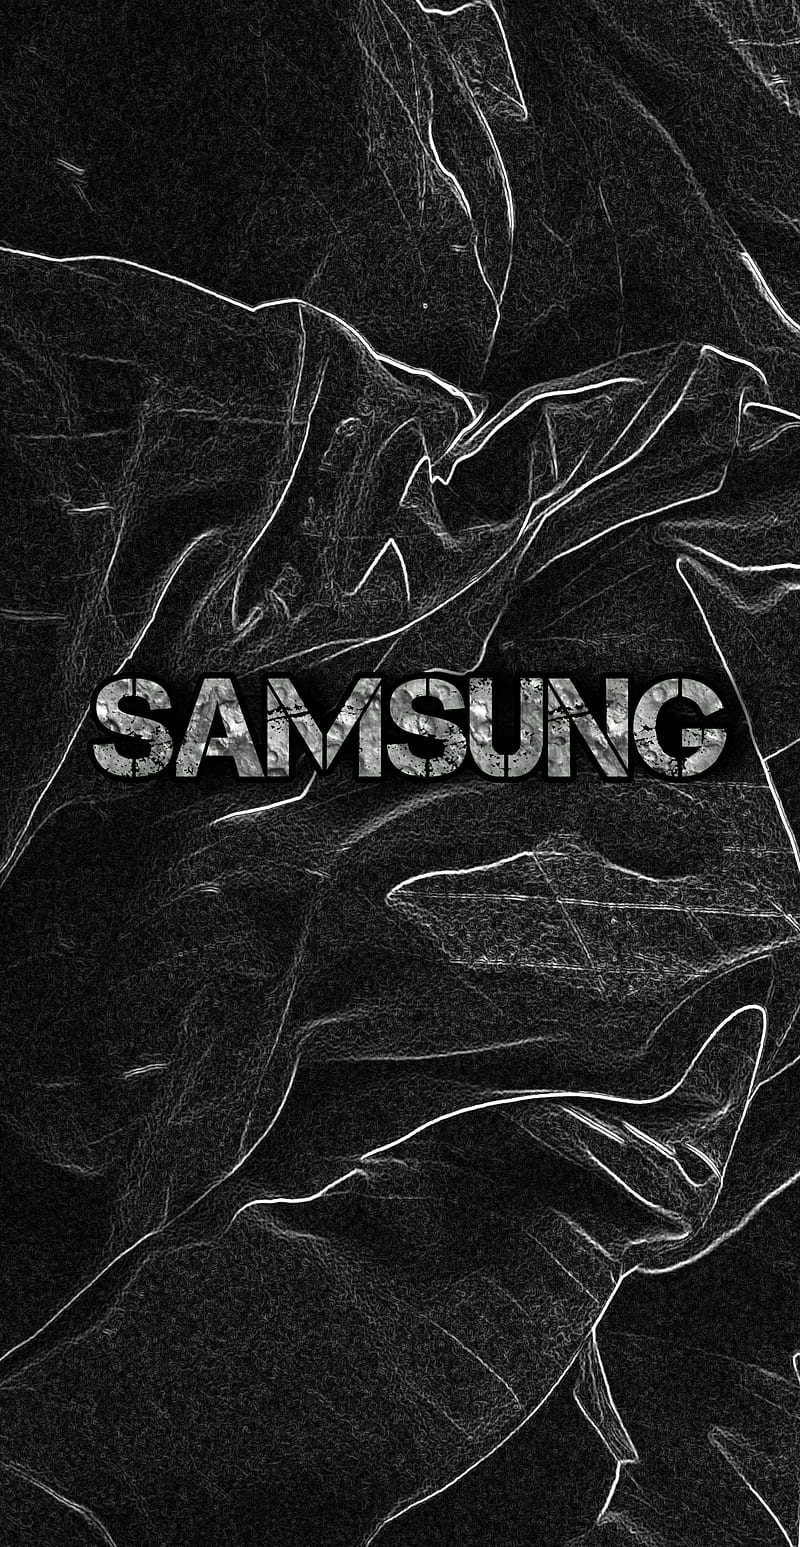 1920x1080px, 1080P free download Samsung, black and white, black